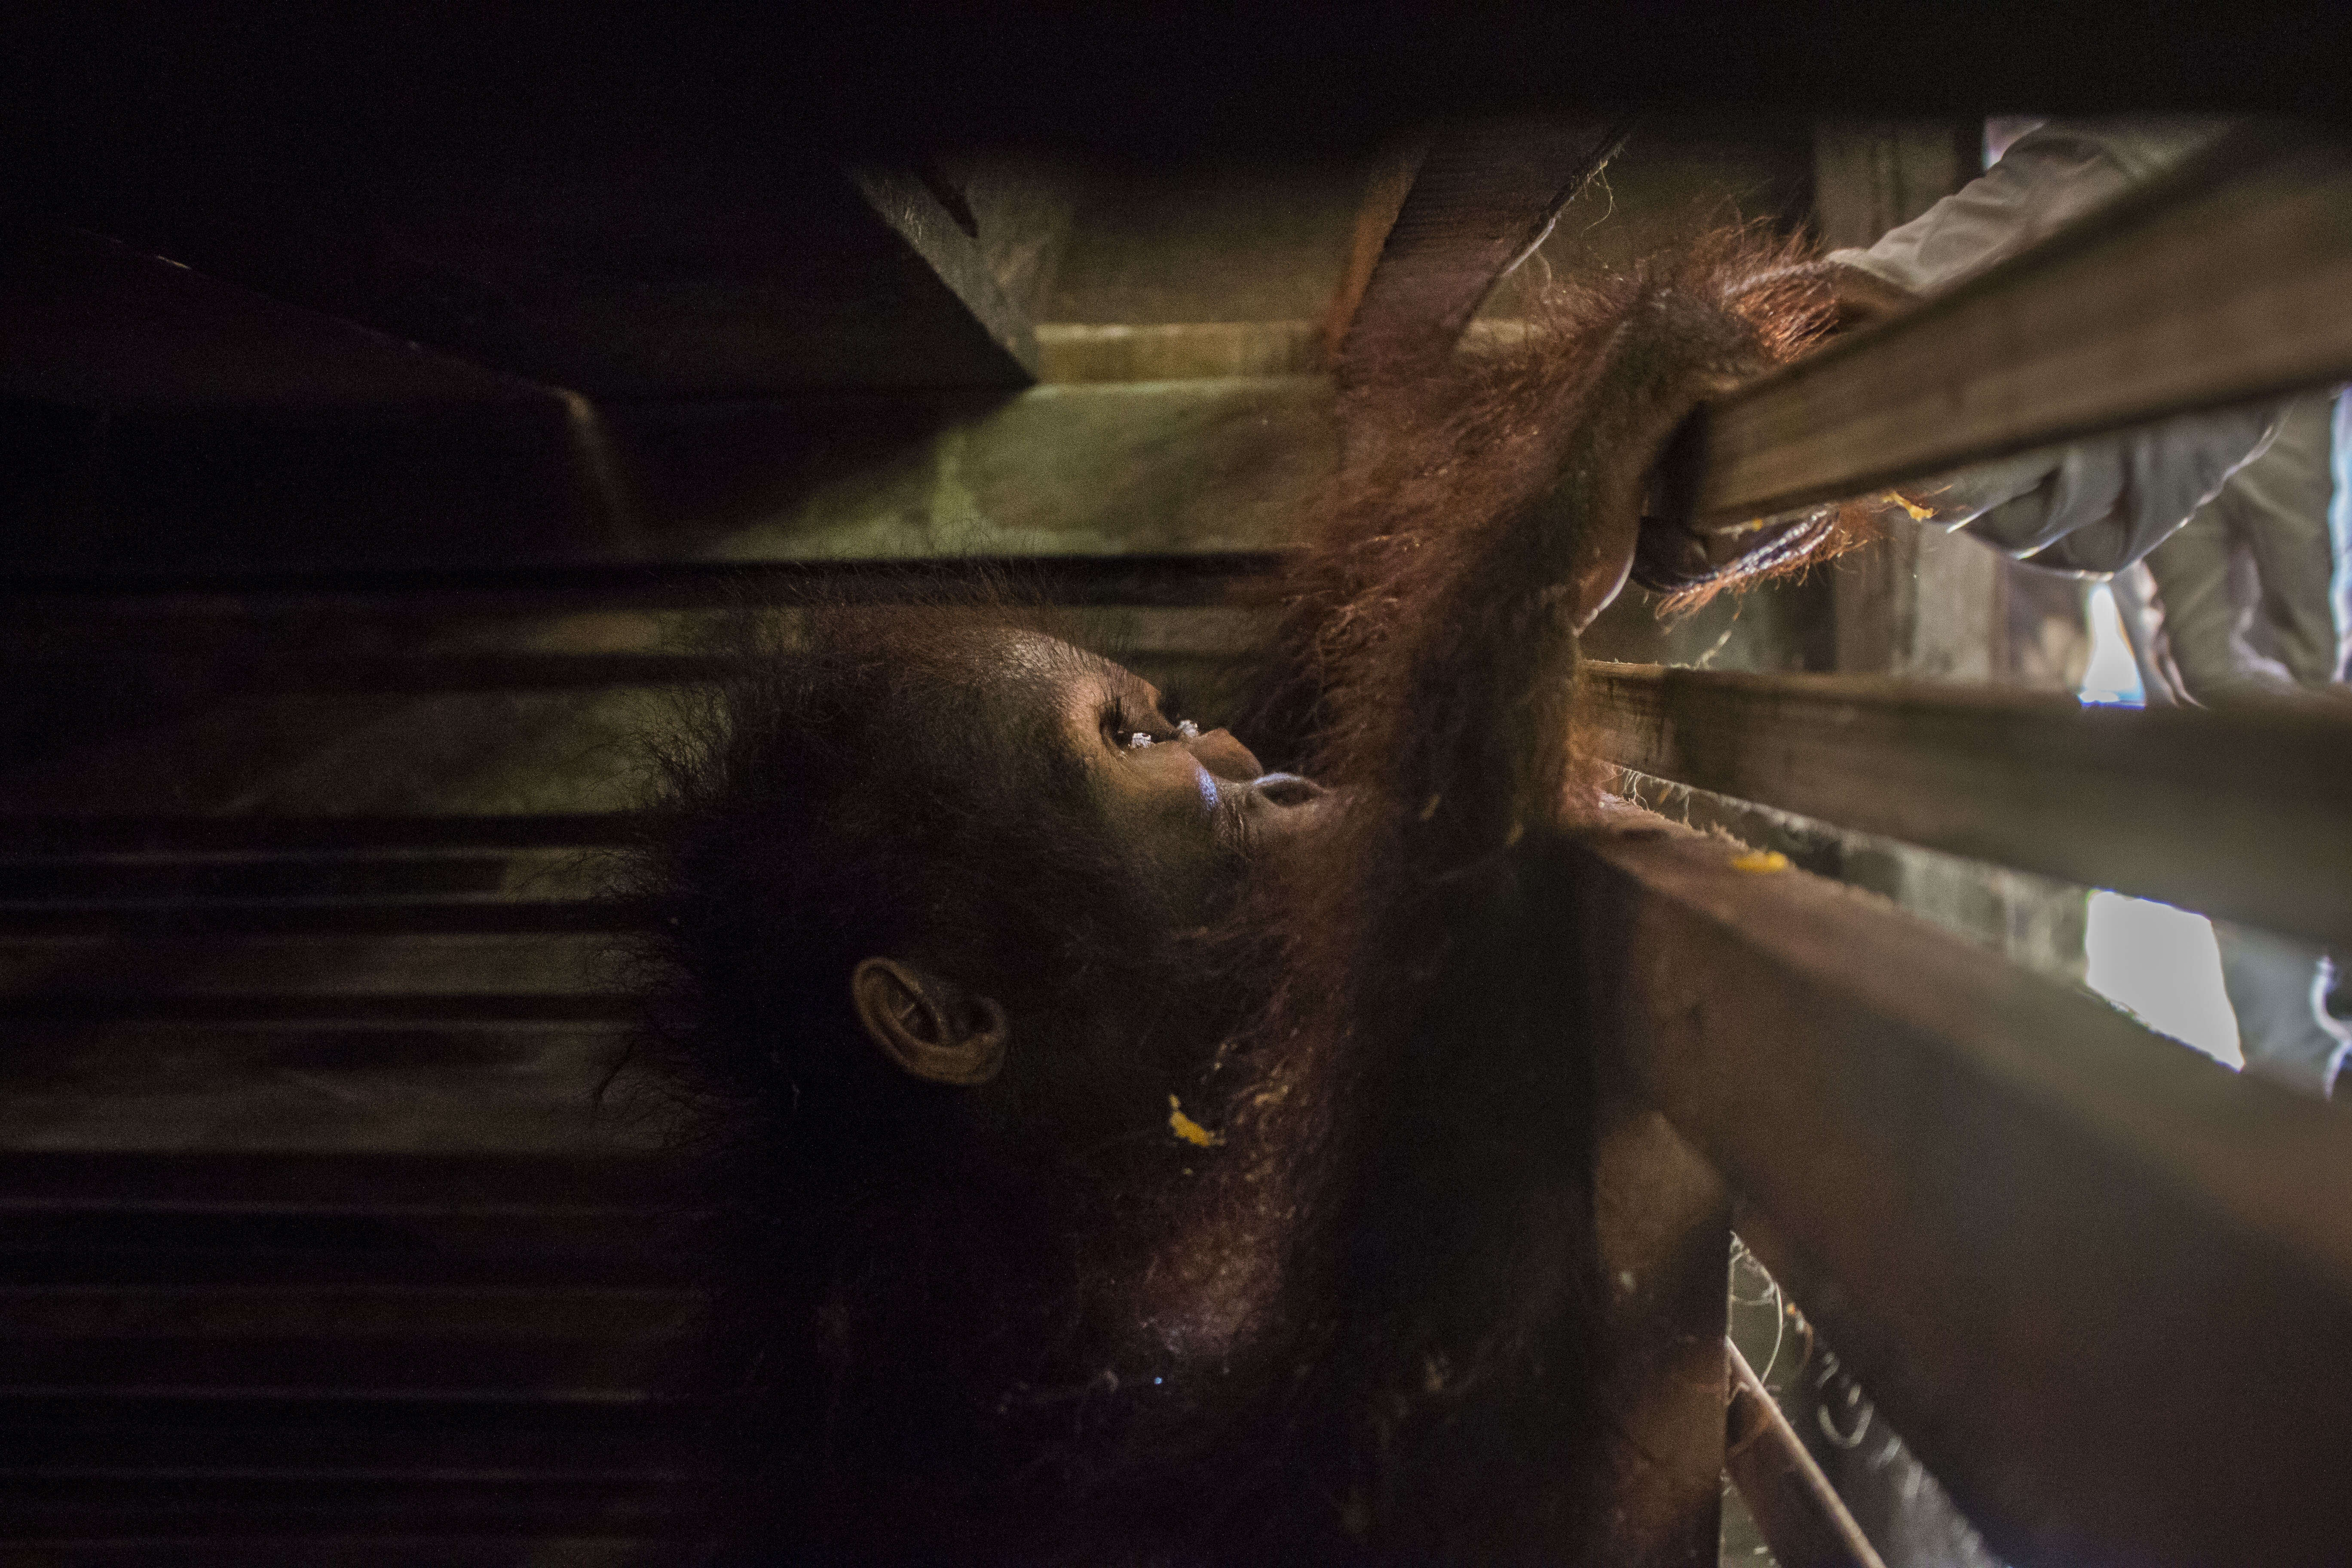 Baby orangutan trying to get out of wooden box